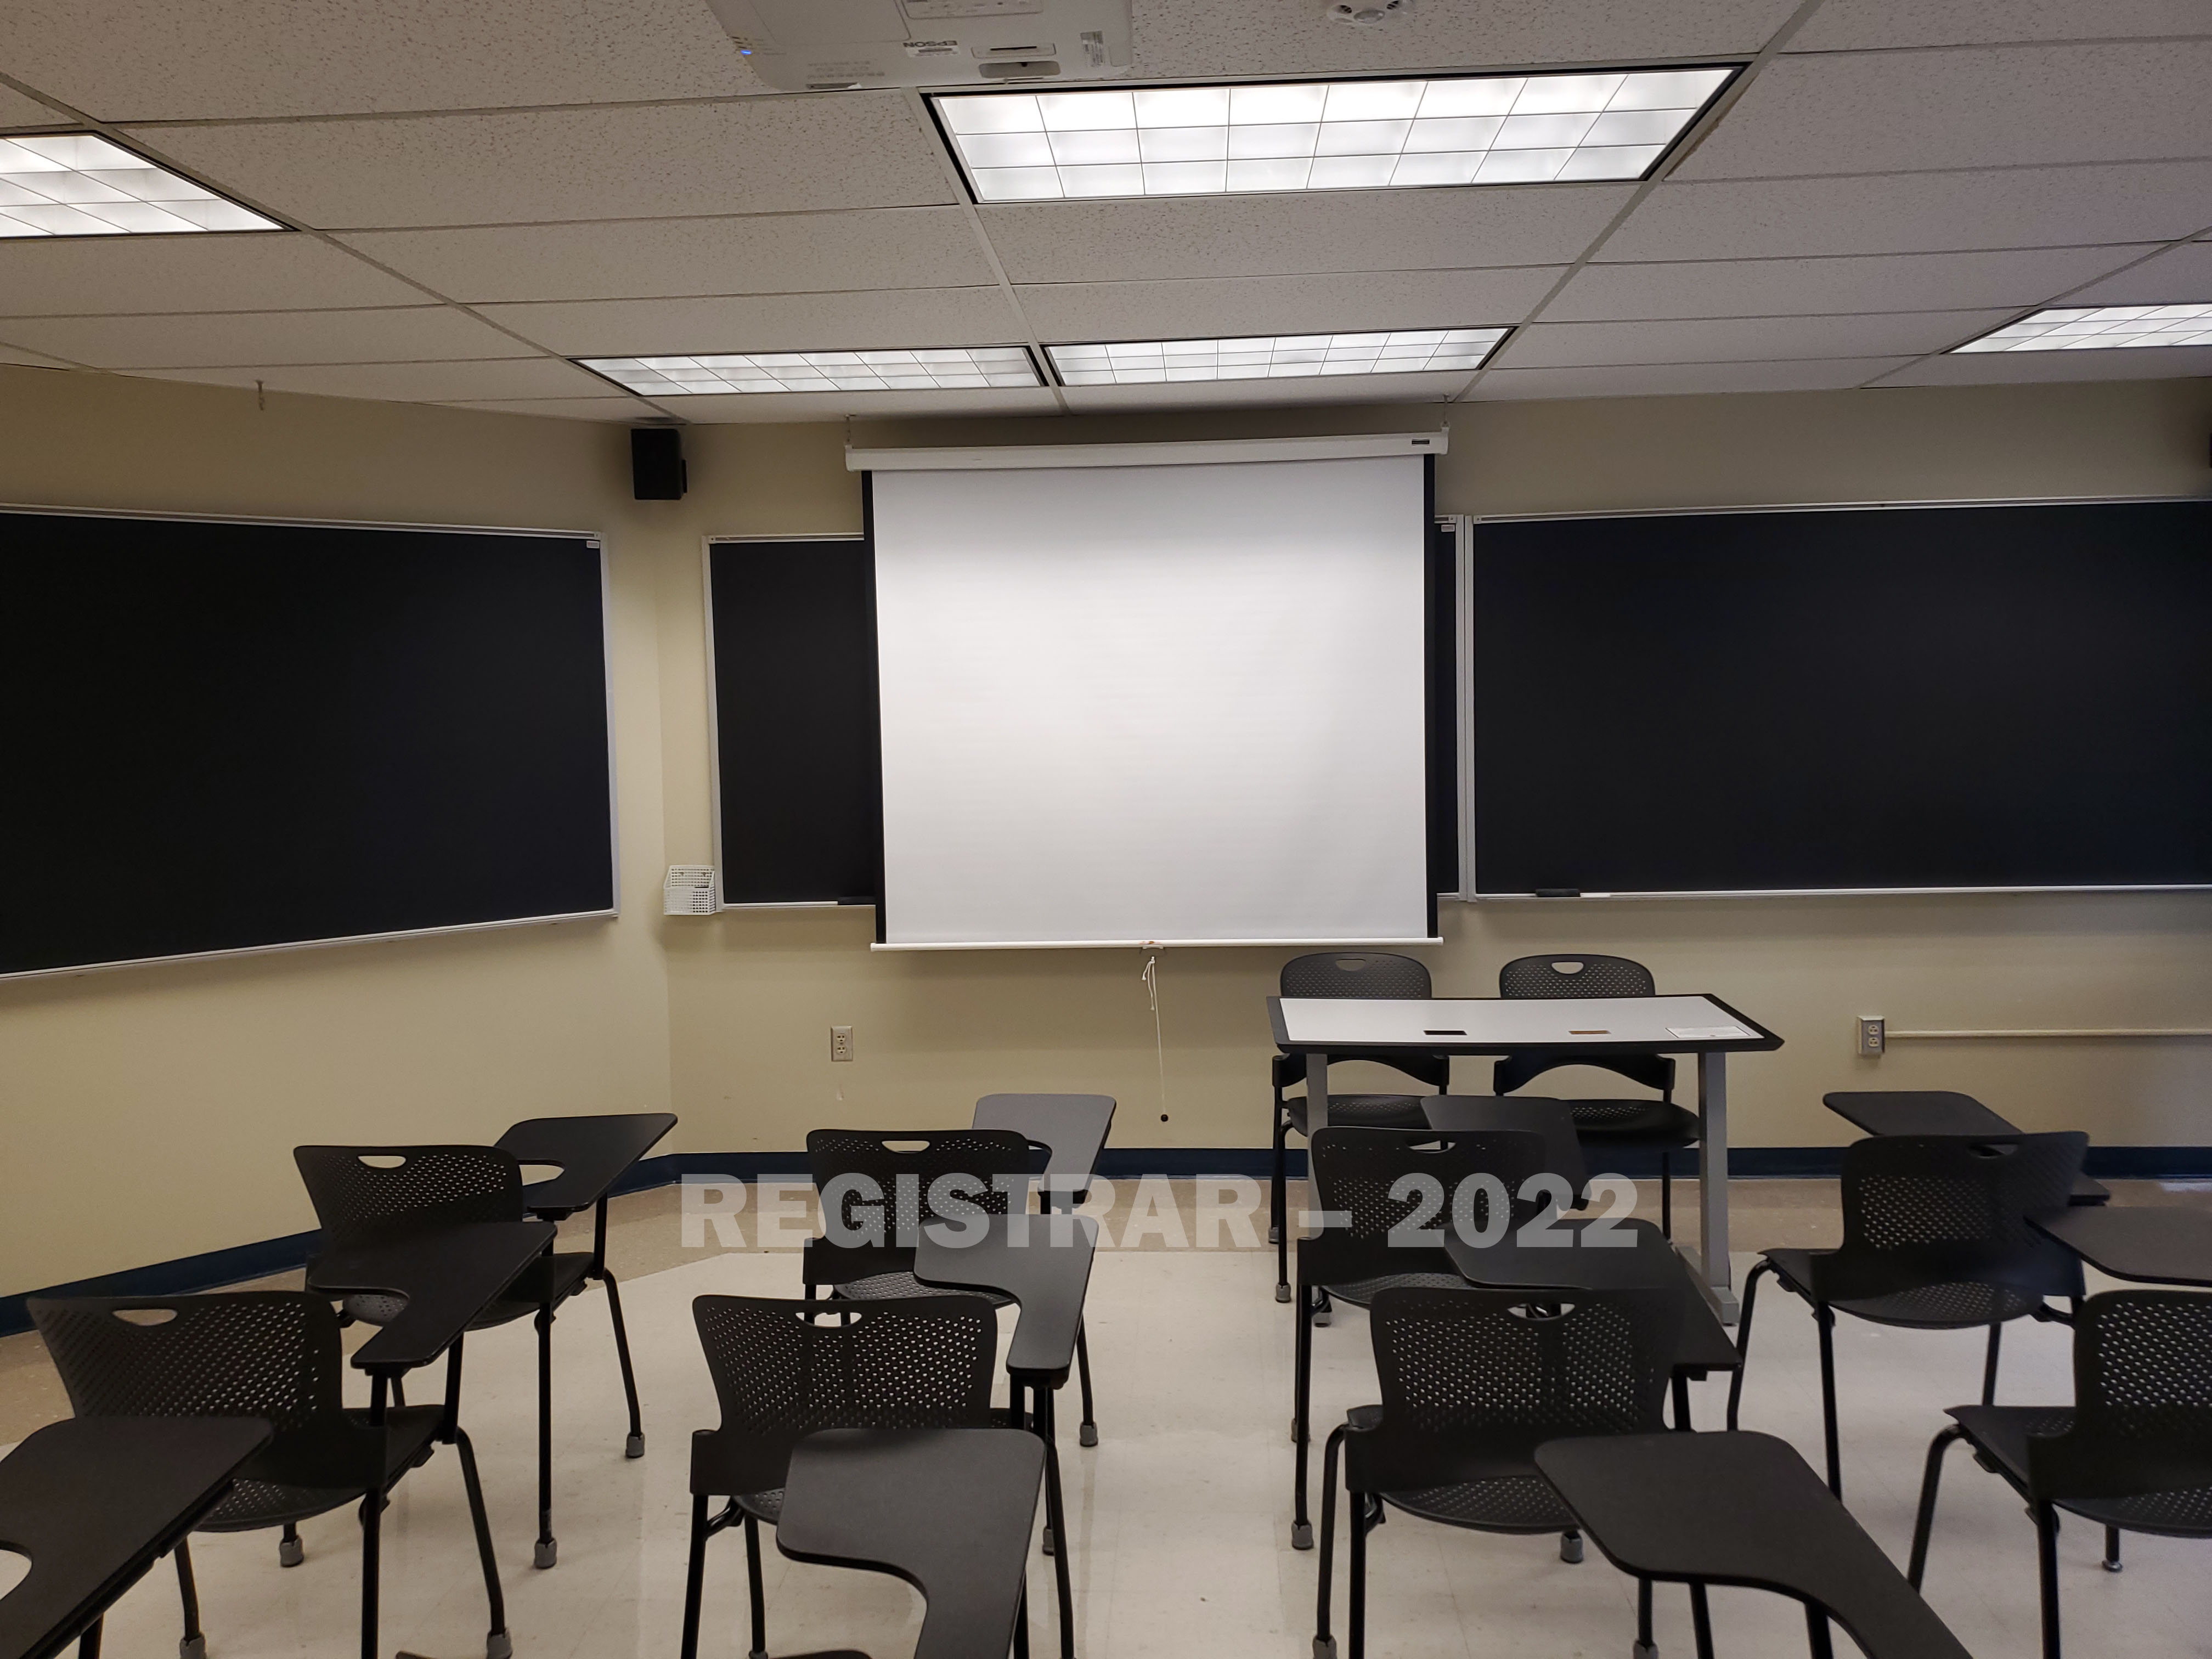 Enarson Classroom Building room 230 view from the back of the room with projector screen down